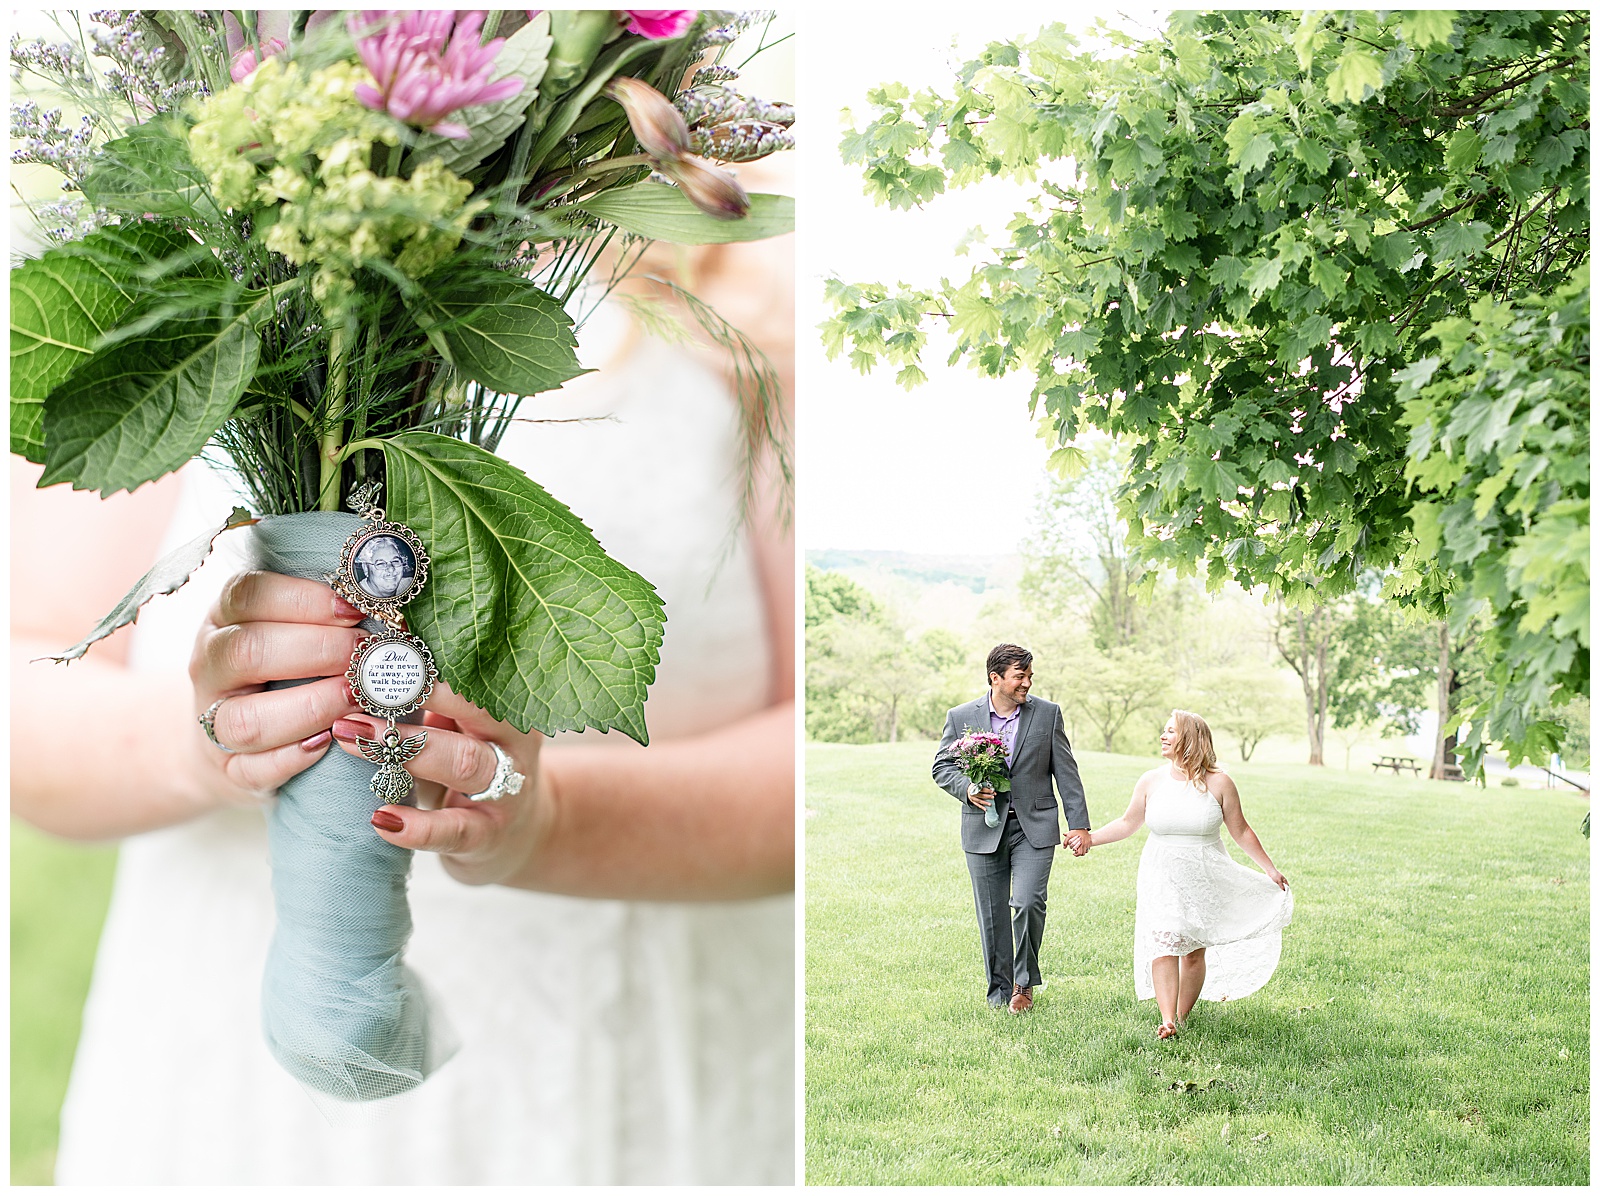 chain on bouquet with image of bride's father who passed and couple walking hand and hand looking at each other